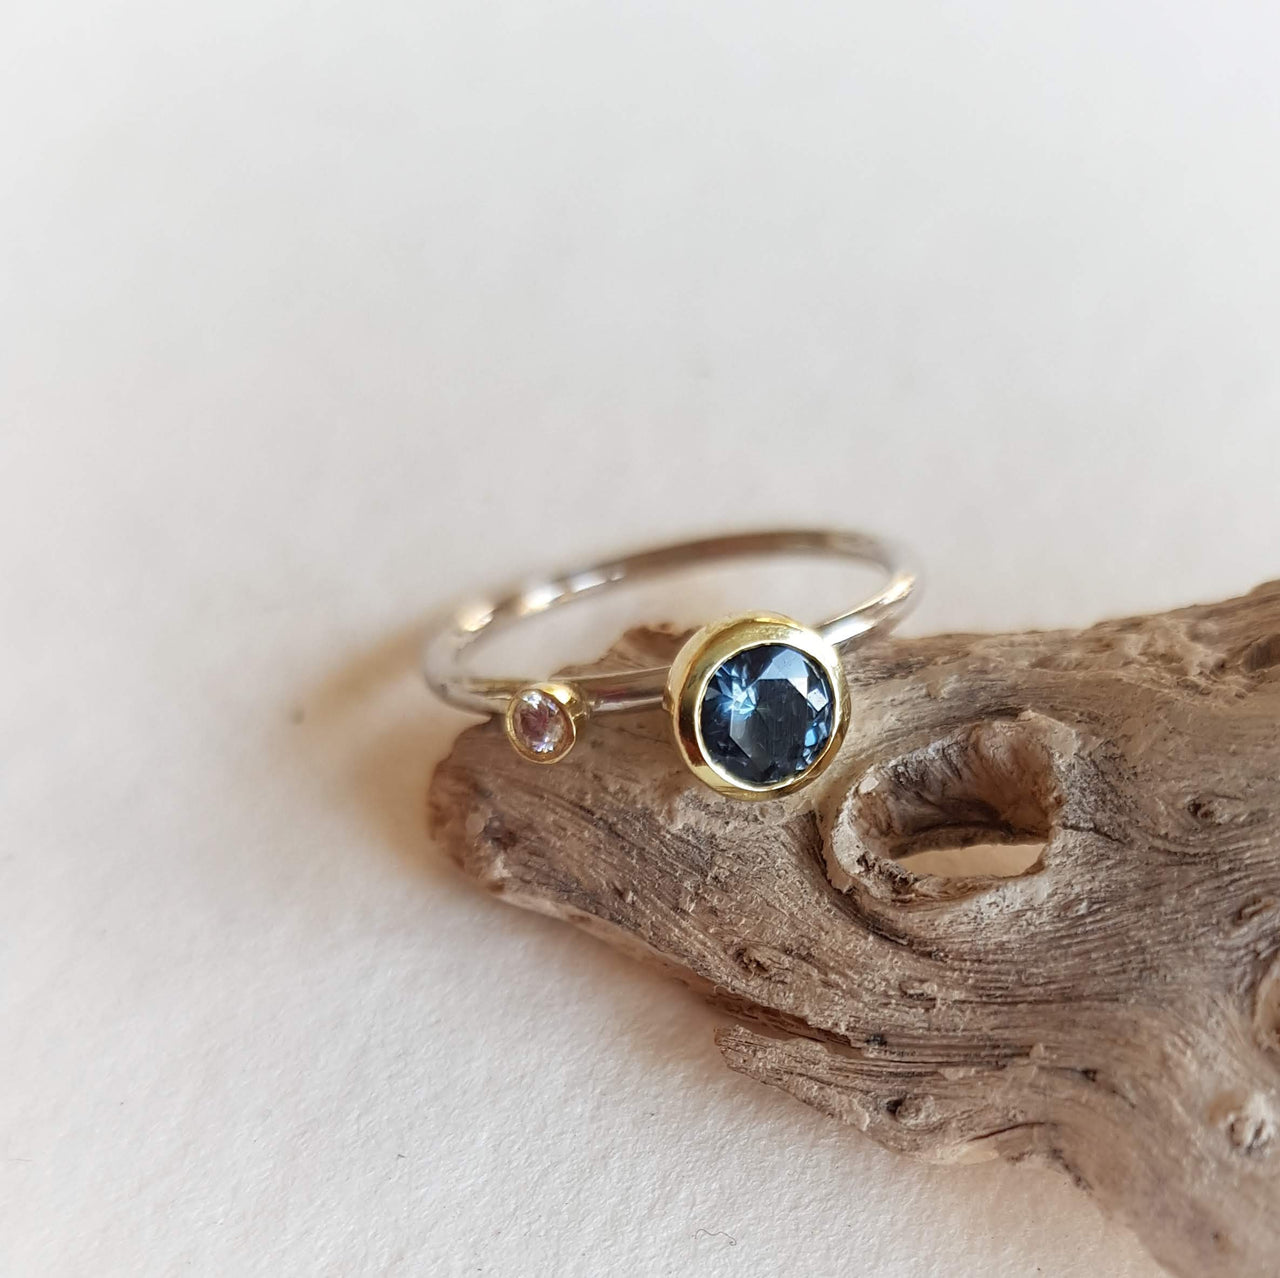 18ct Gold, Blue Spinel & Diamond Ring